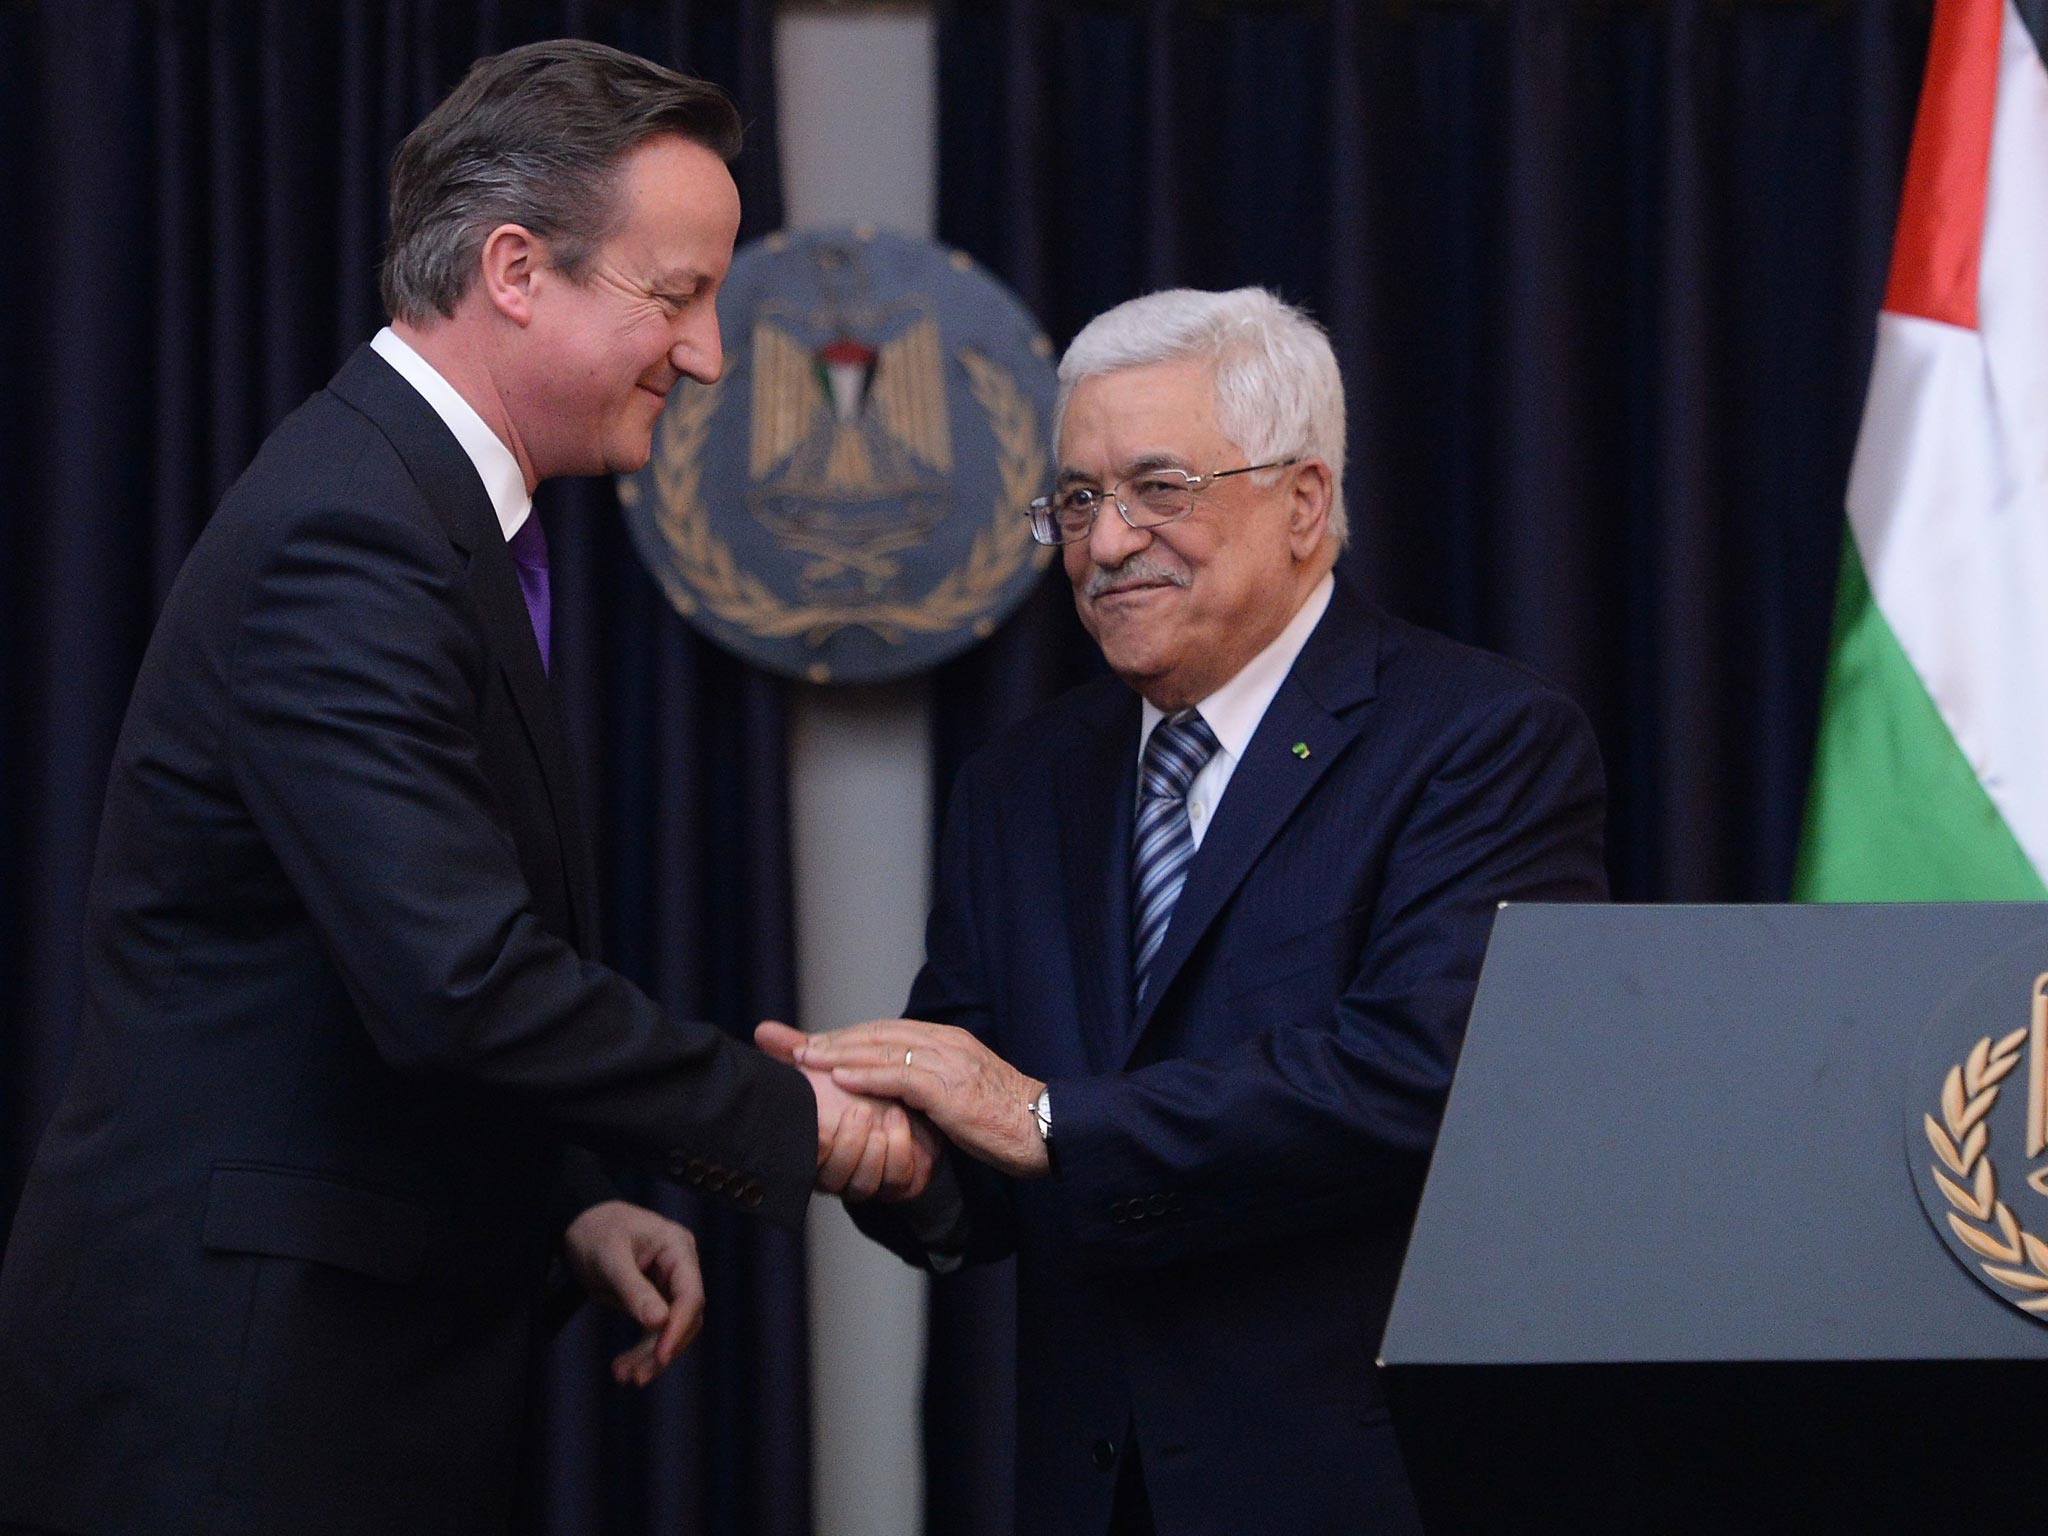 Prime Minister David Cameron holds a news conference with Palestinian president Mahmoud Abbas